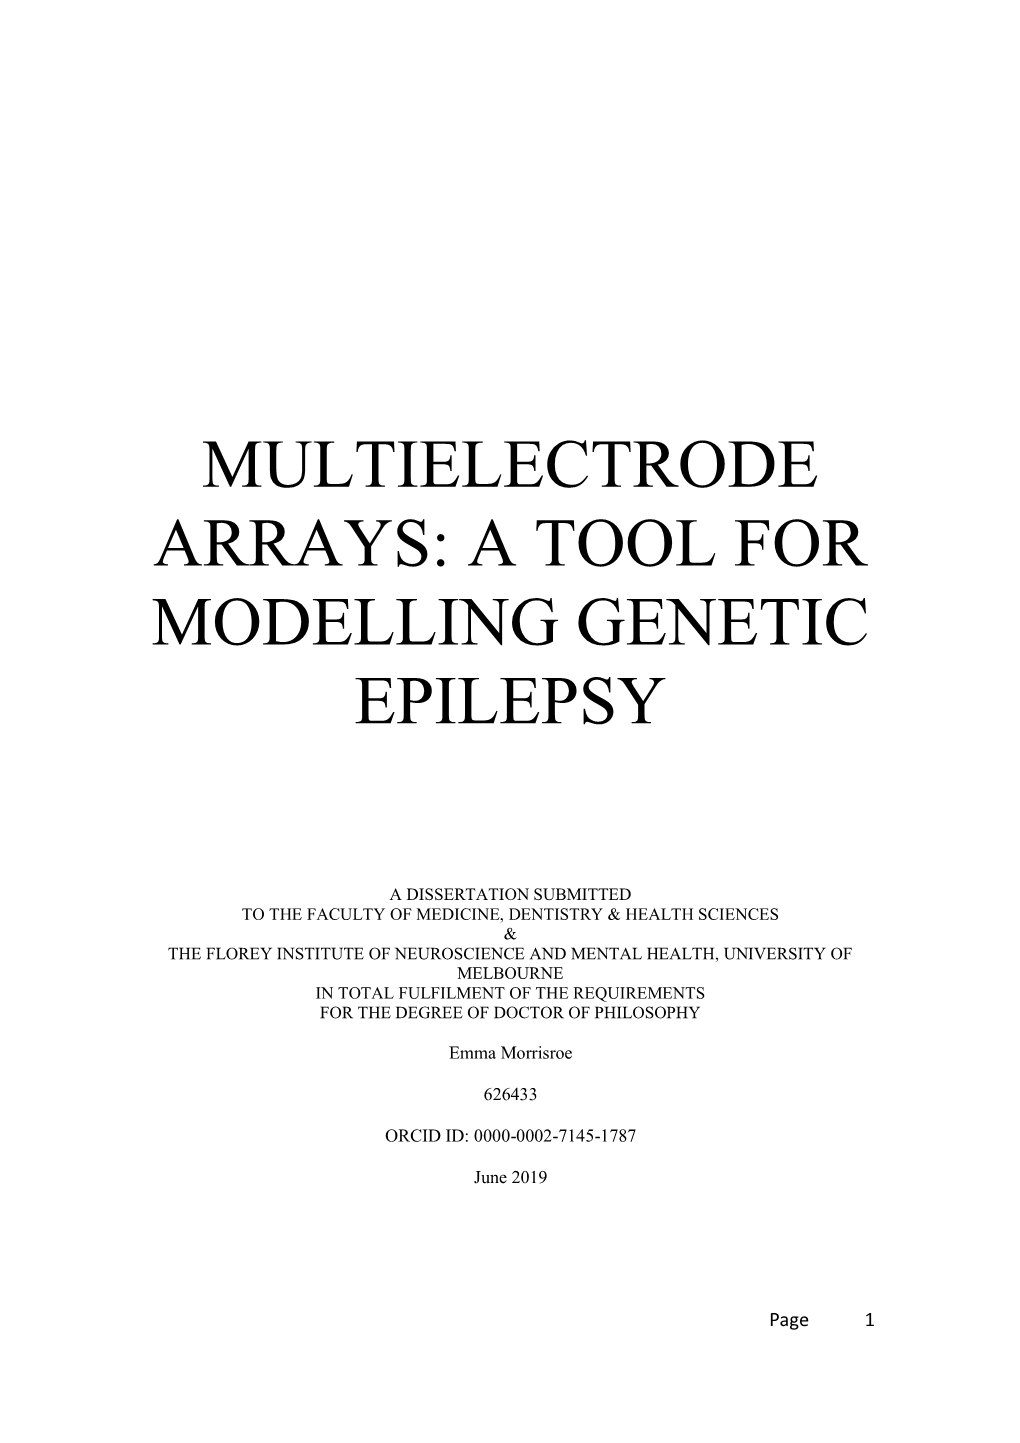 A Tool for Modelling Genetic Epilepsy